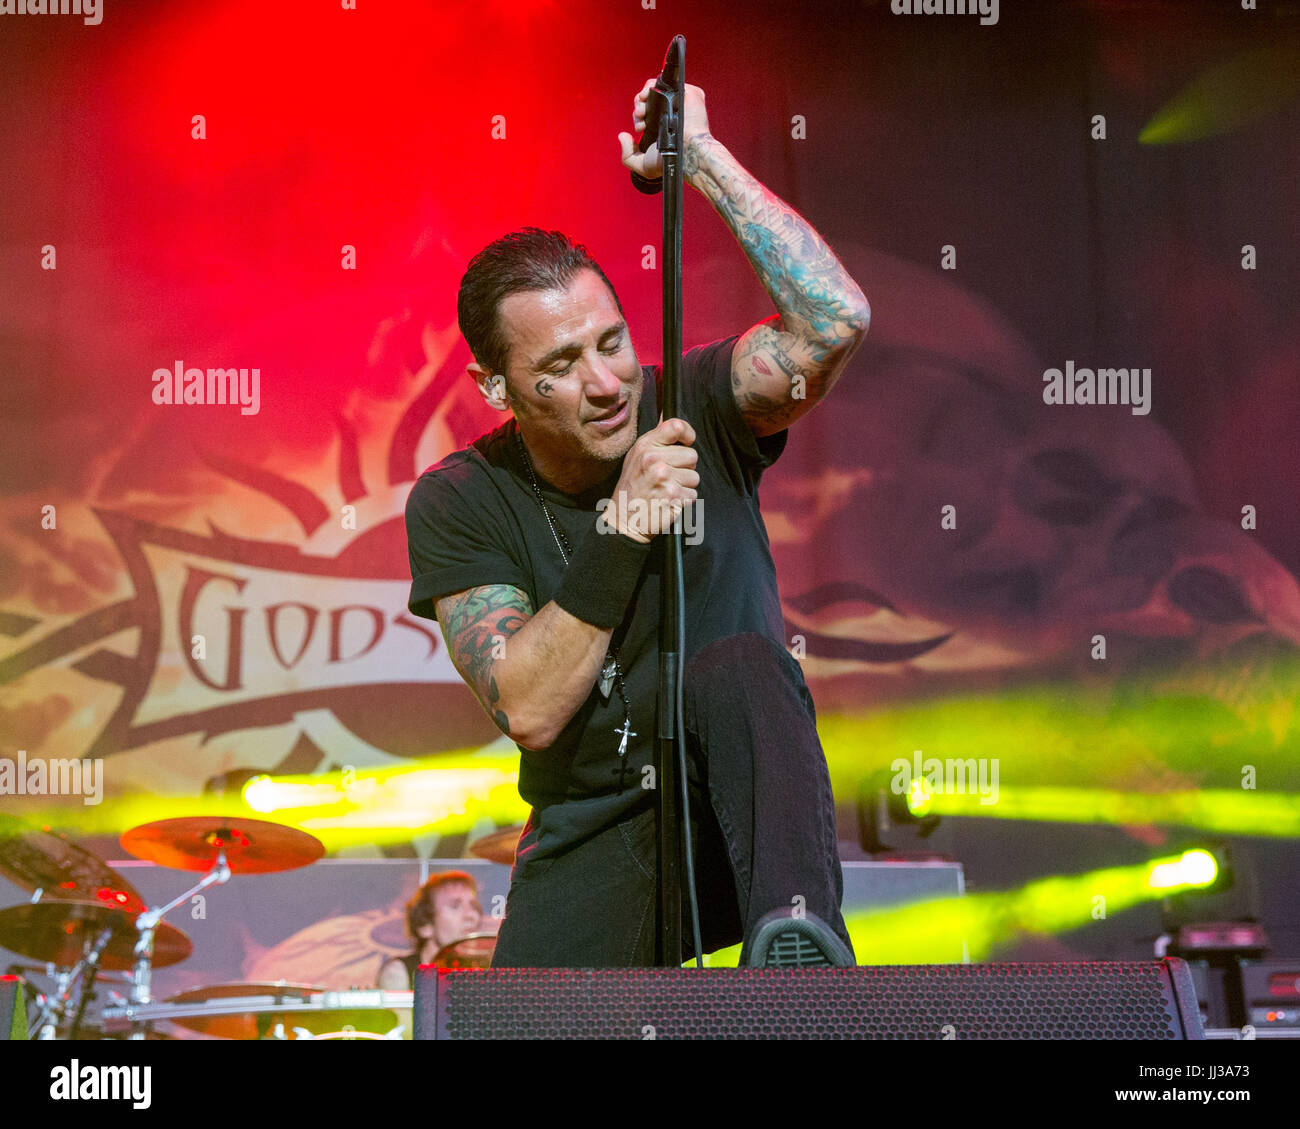 List 97+ Images godsmack @ chicago open air 2017 in bridgeview, il, toyota park, july 15 Stunning